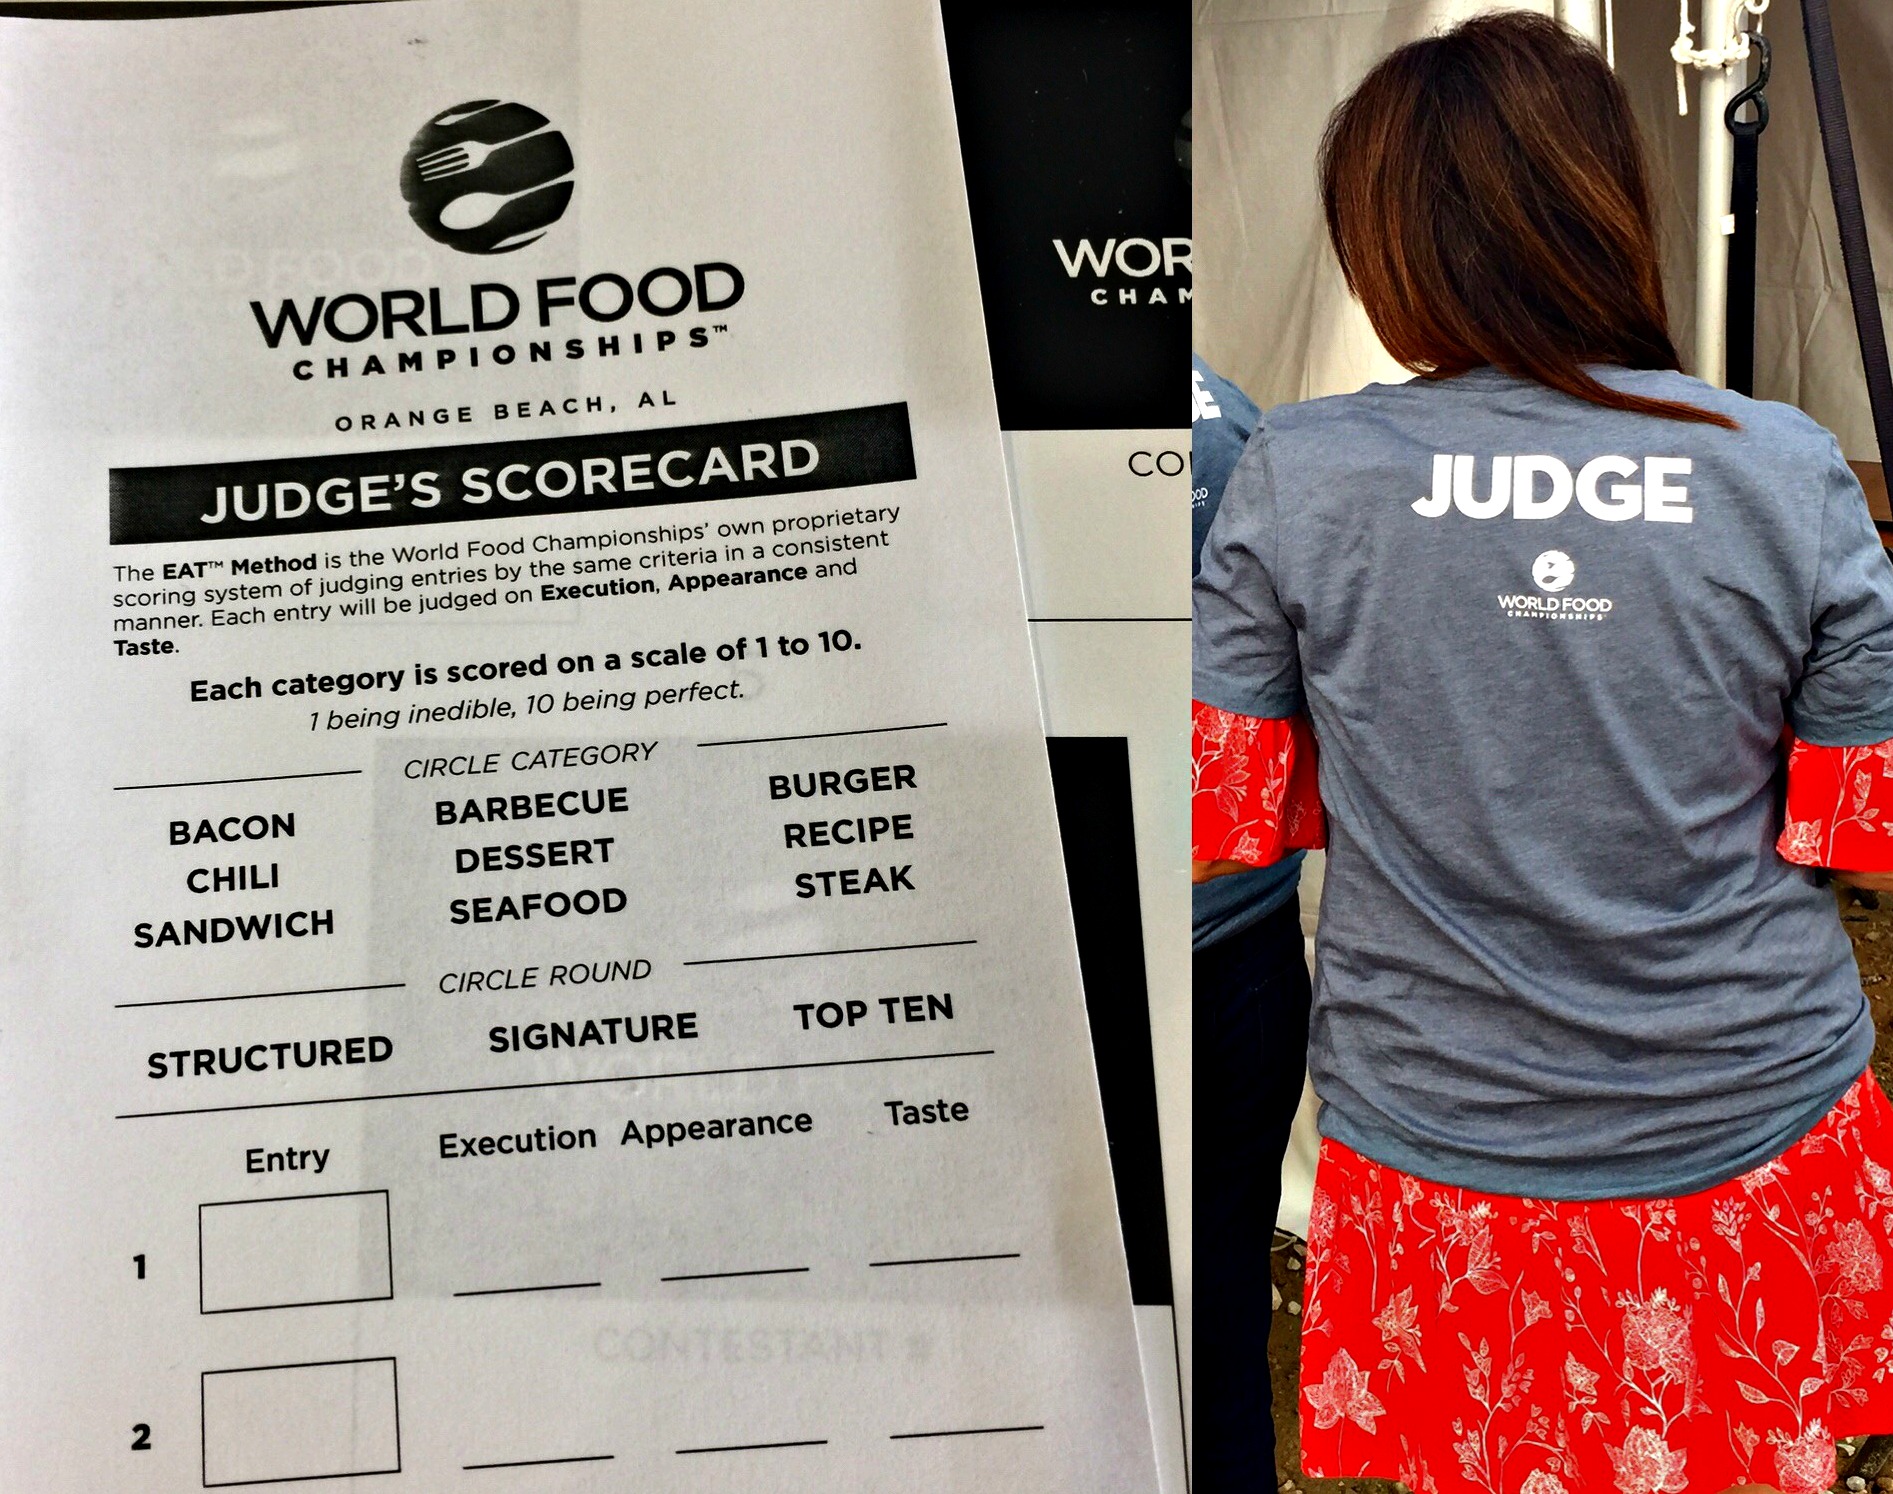 Judges scorecard at World Food Championships to judge food competition